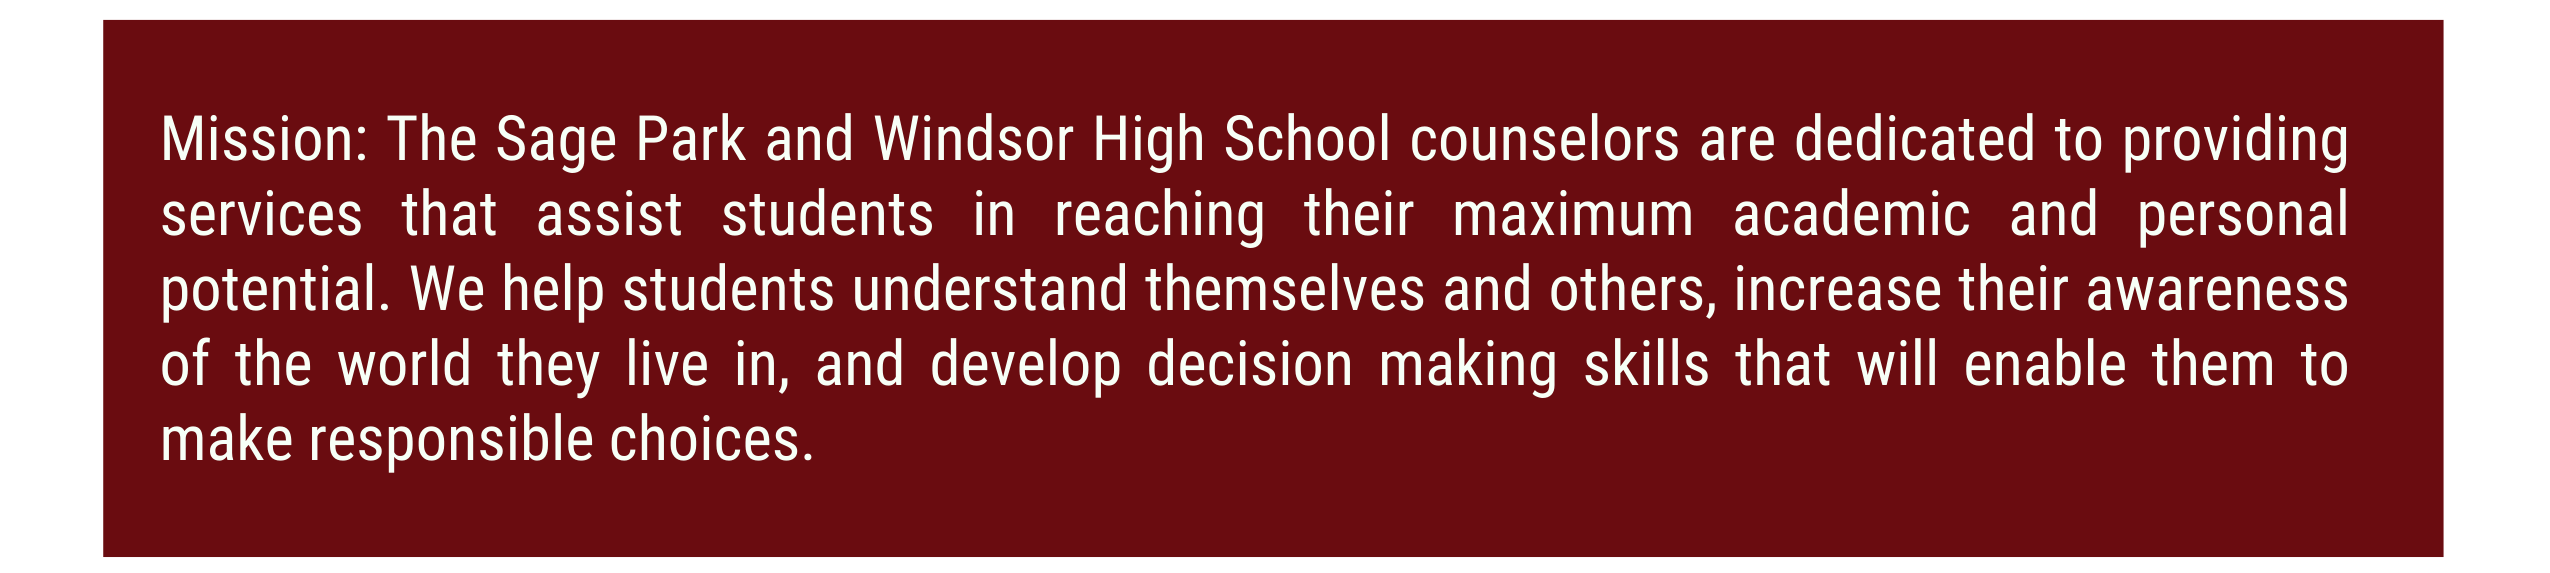 Mission: The Sage Park and Windsor High School counselors are dedicated to providing services that assist students in reaching their maximum academic and personal potential. We help students understand themselves and others, increase their awareness of the world they live in, and develop decision making skills that will enable them to make responsible choices. 